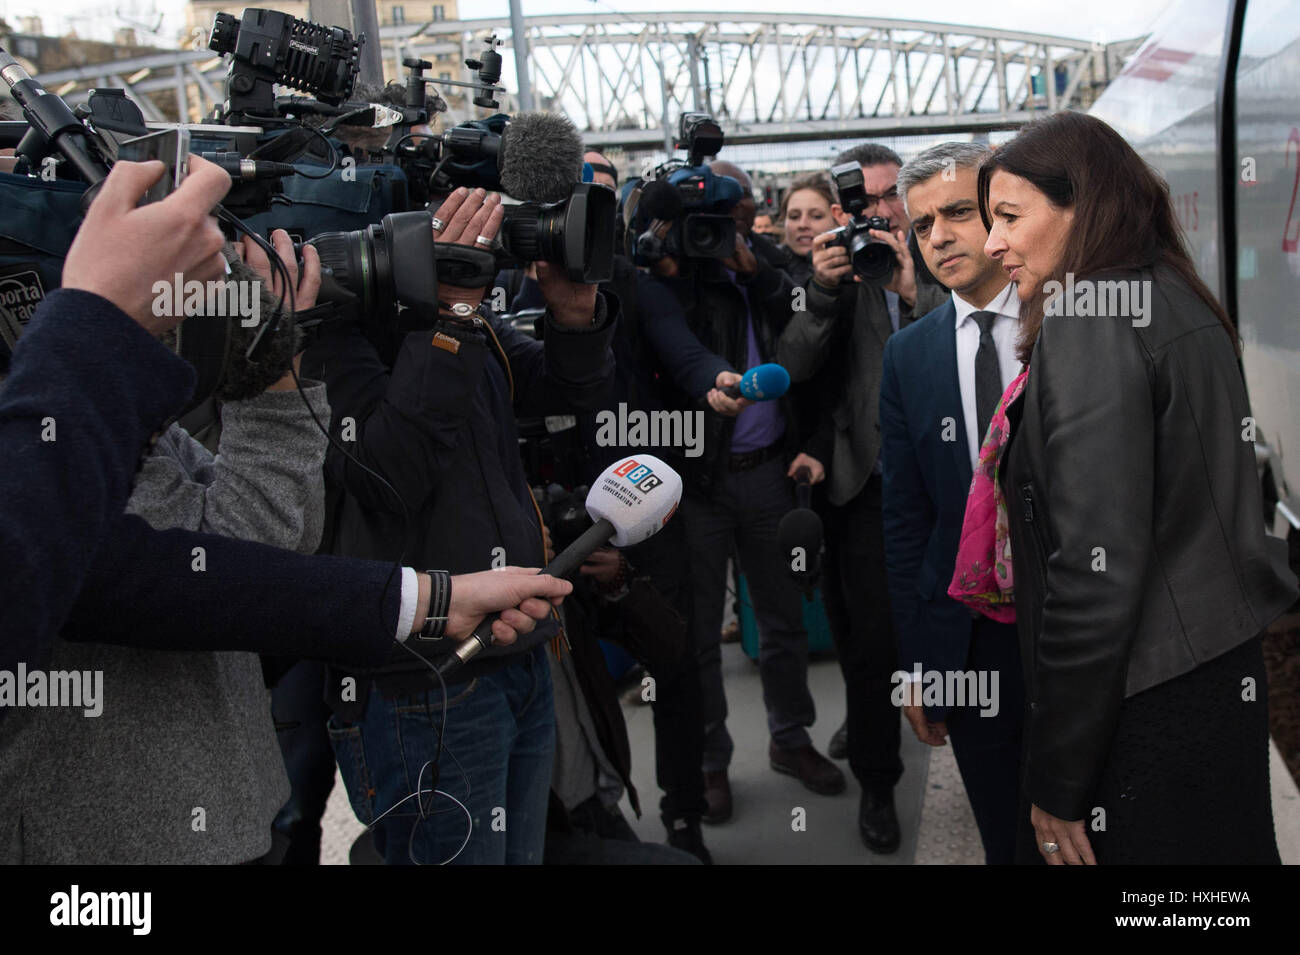 London mayor, Sadiq Khan is met by his Paris counterpart, Anne Hidalgo at Gare du Nord in the French capital as he arrived from Brussels during his three day visit to the European cities where he will meet EU leaders and officials to talk about Brexit and the recent terror attack in London. Stock Photo